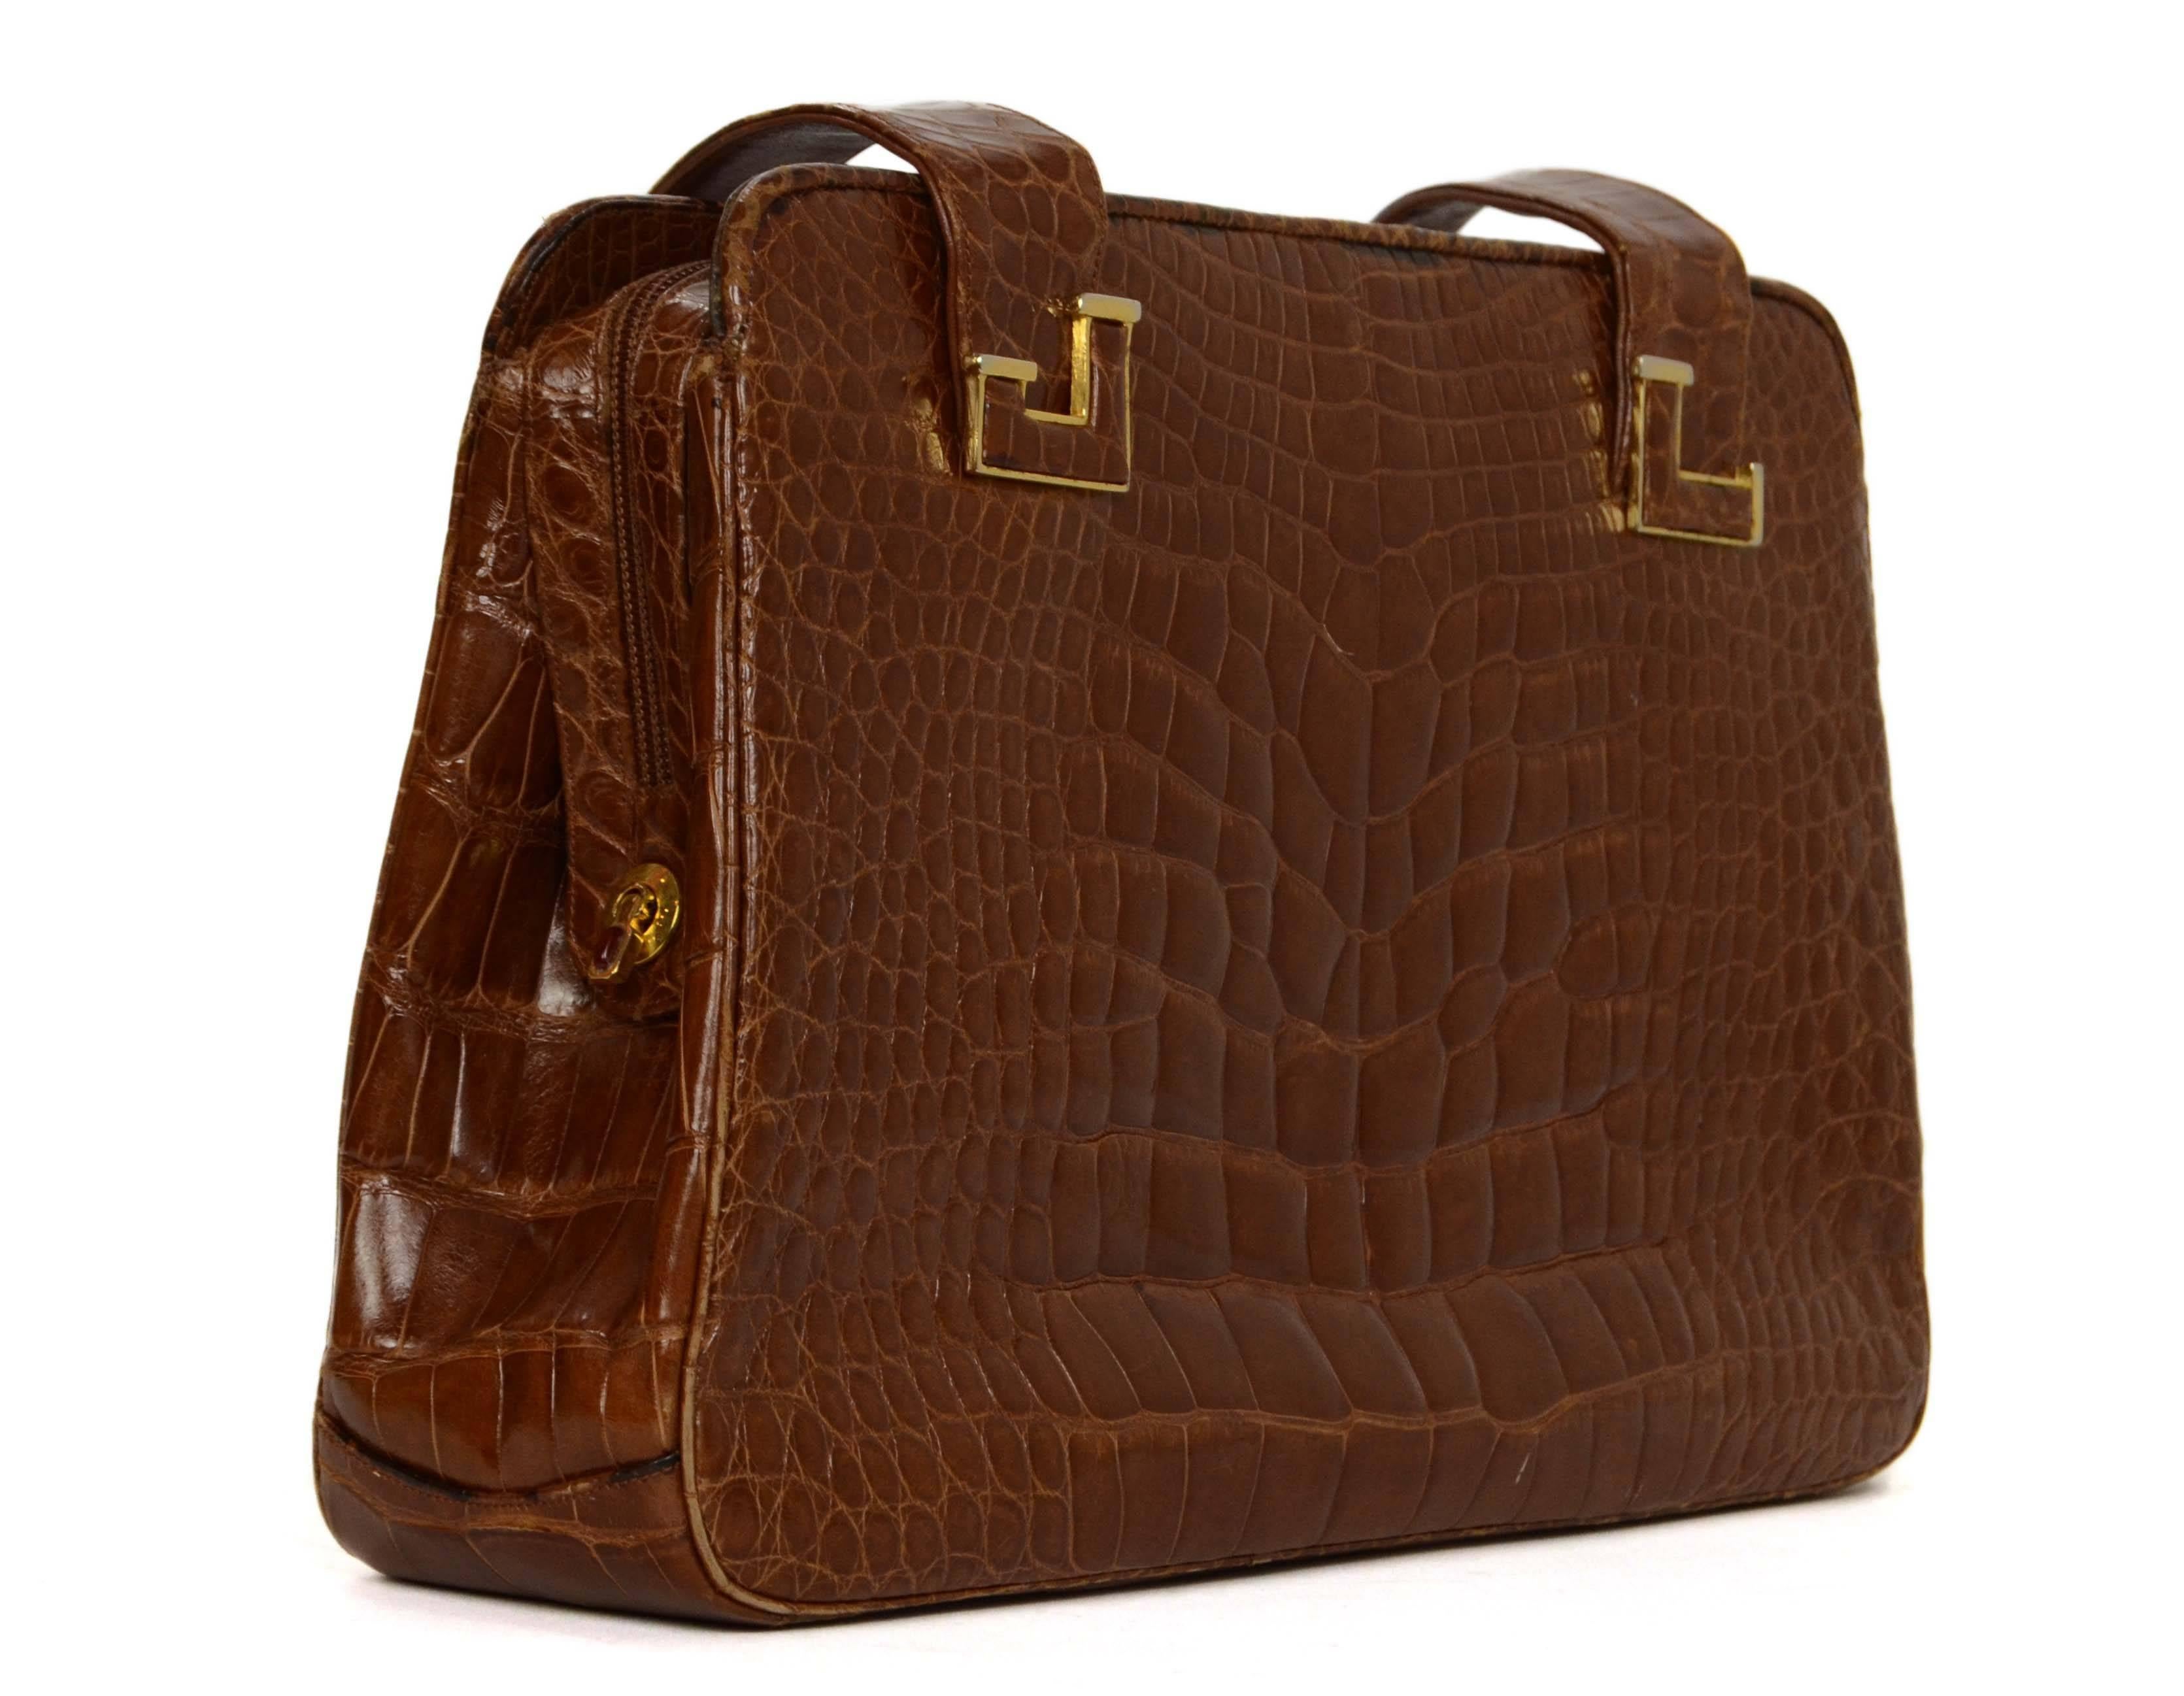 Judith Leiber Brown Alligator Shoulder Bag 
Color: Brown
Hardware: Goldtone
Materials: Alligator
Lining: Brown leather
Closure/Opening: Zip around closure
Exterior Pockets: Two large side compartments both with zipper pockets inside
Interior